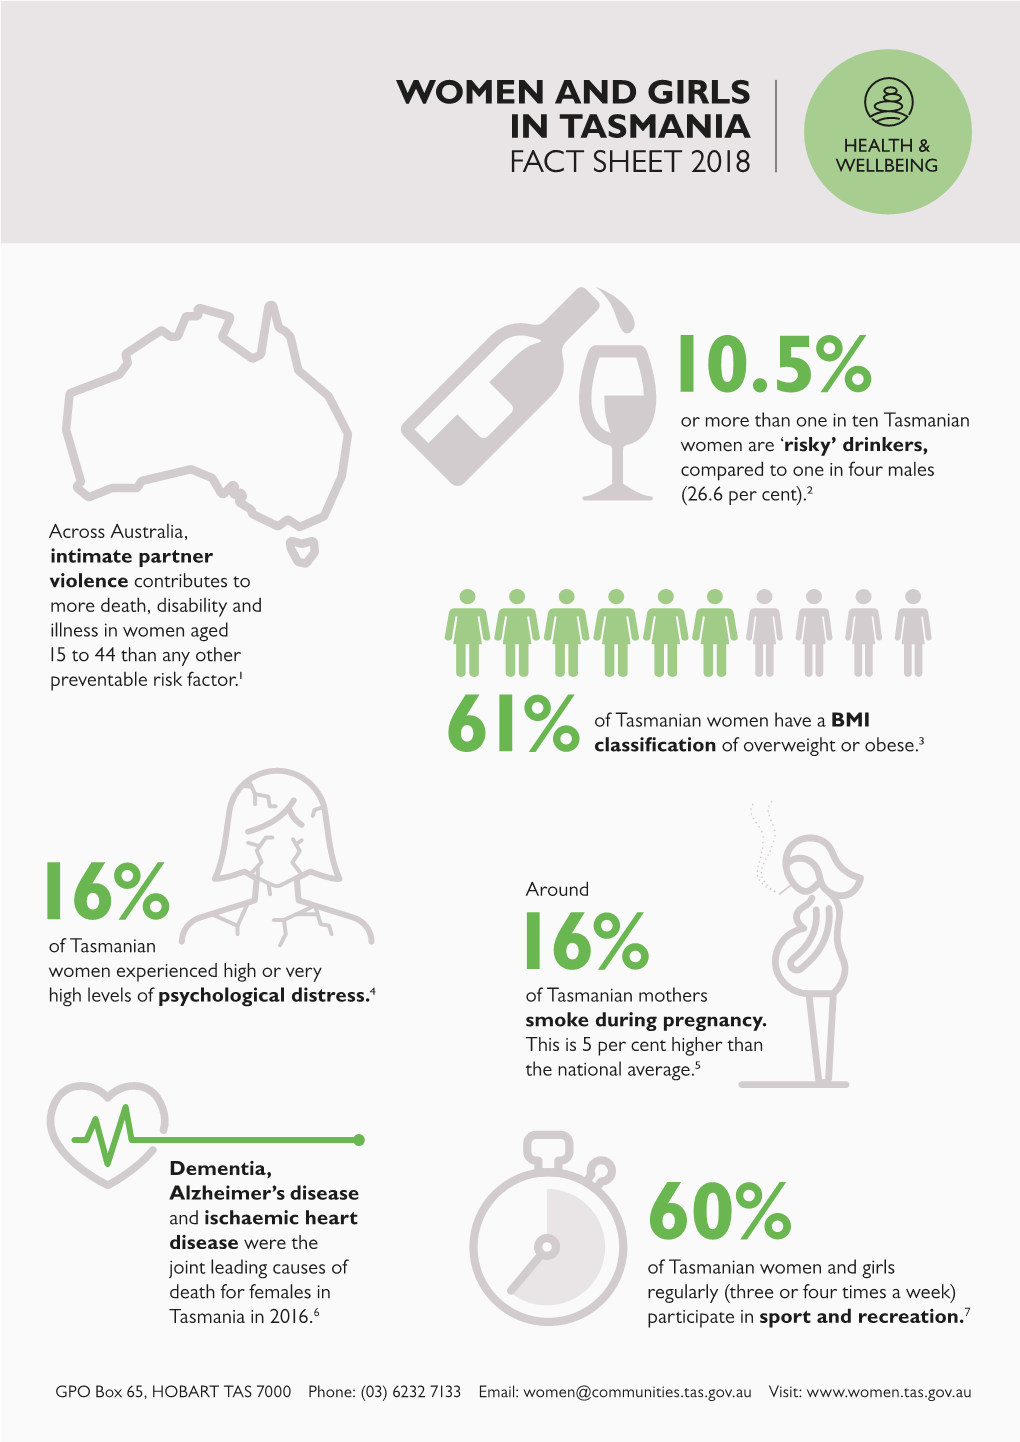 Women and Girls in Tasmania Health and Wellbeing Fact Sheet